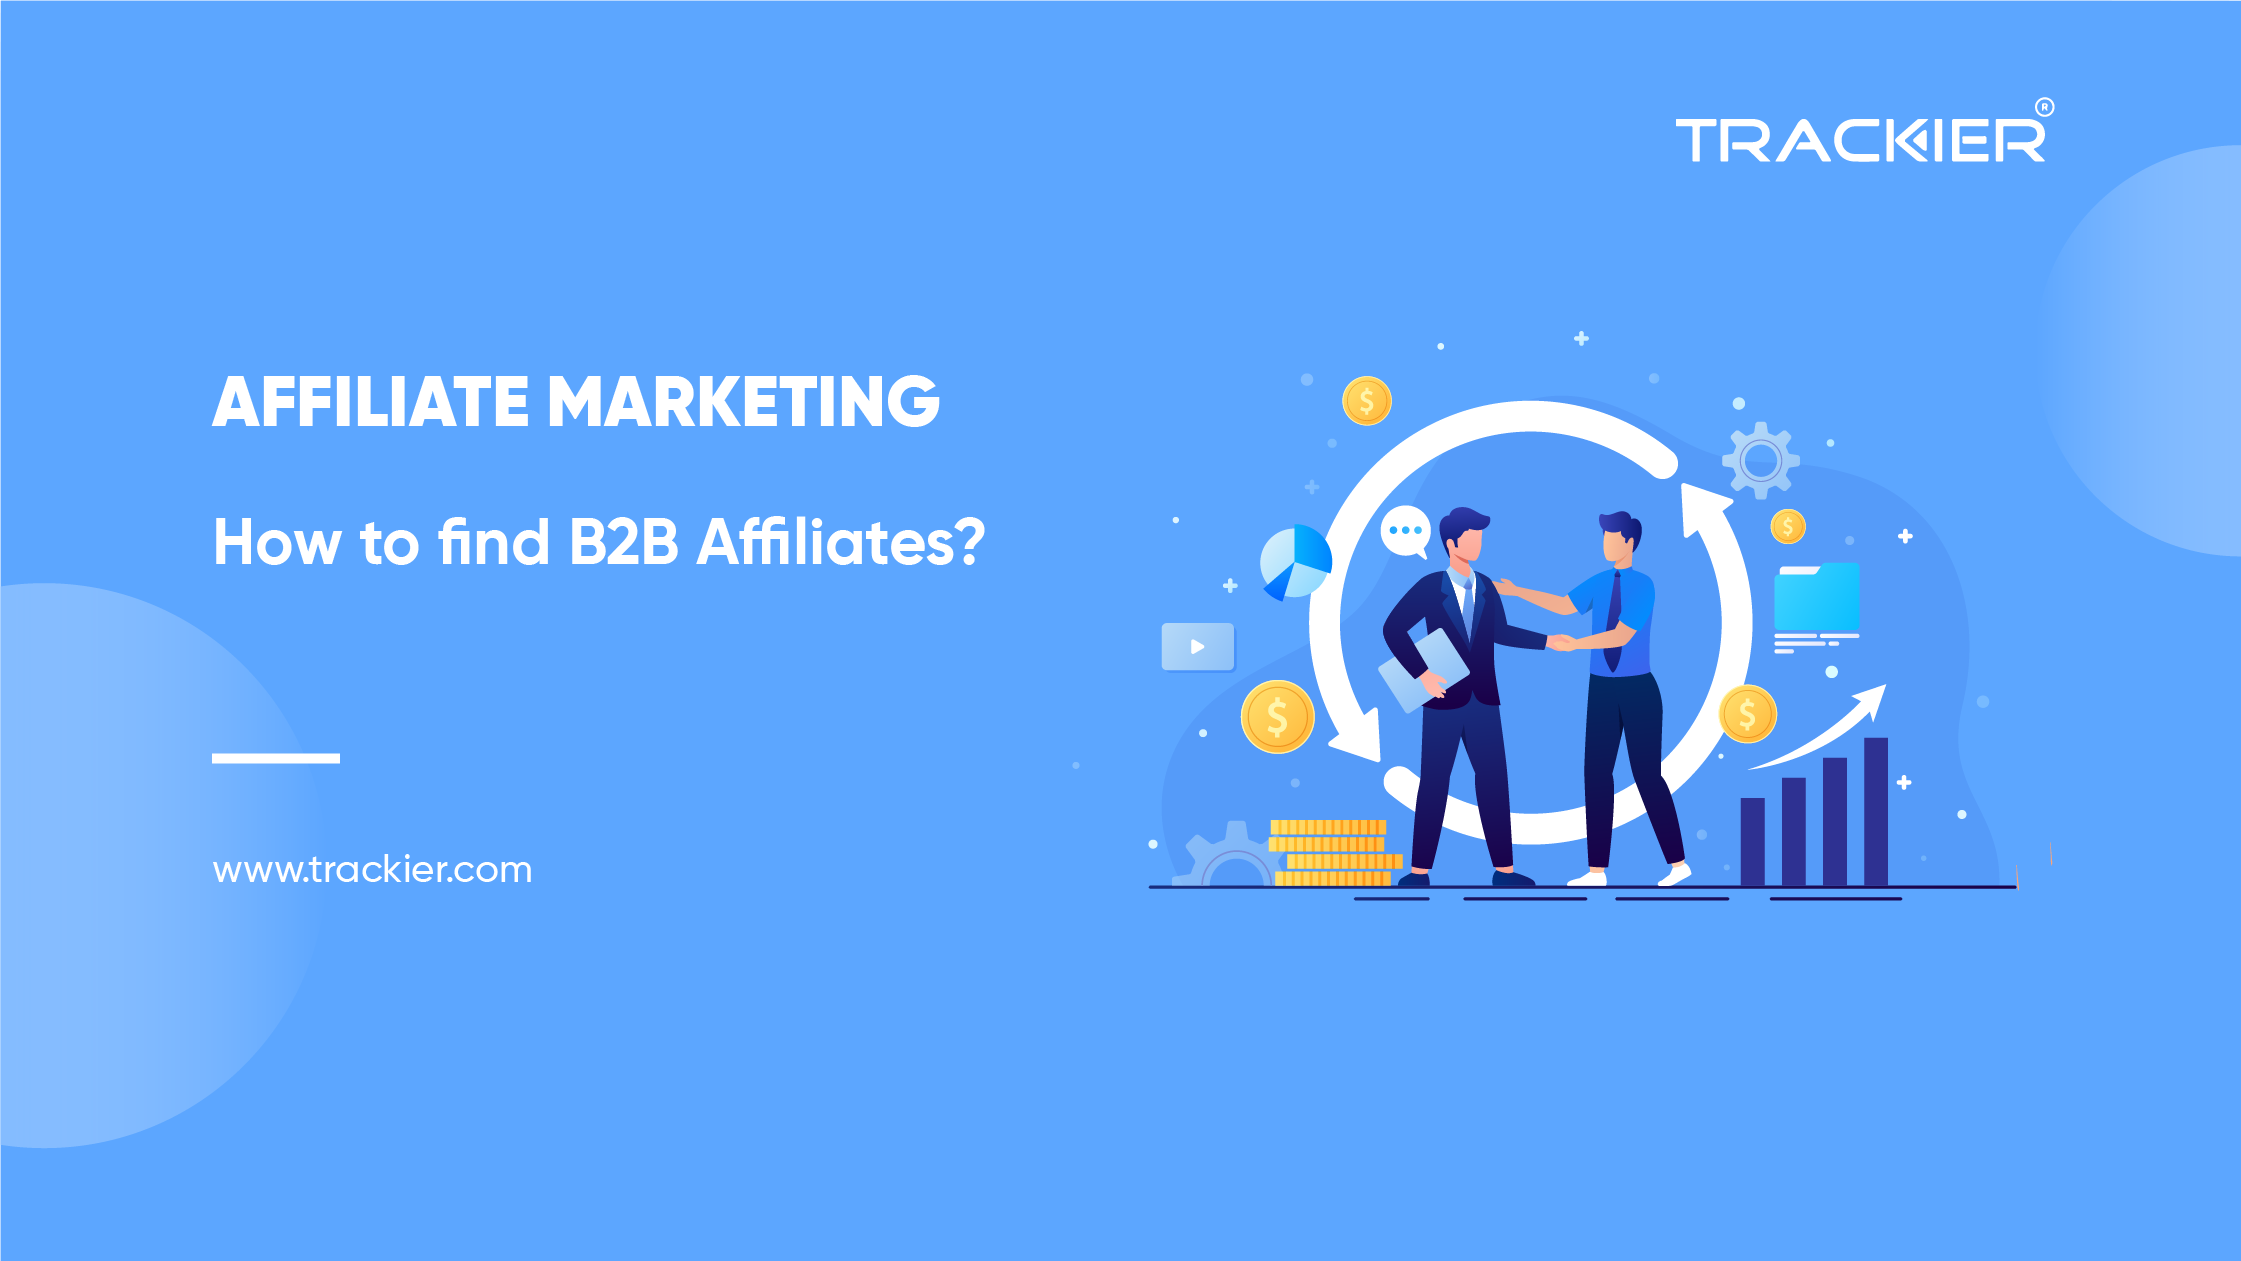 How To Find B2B Affiliates?